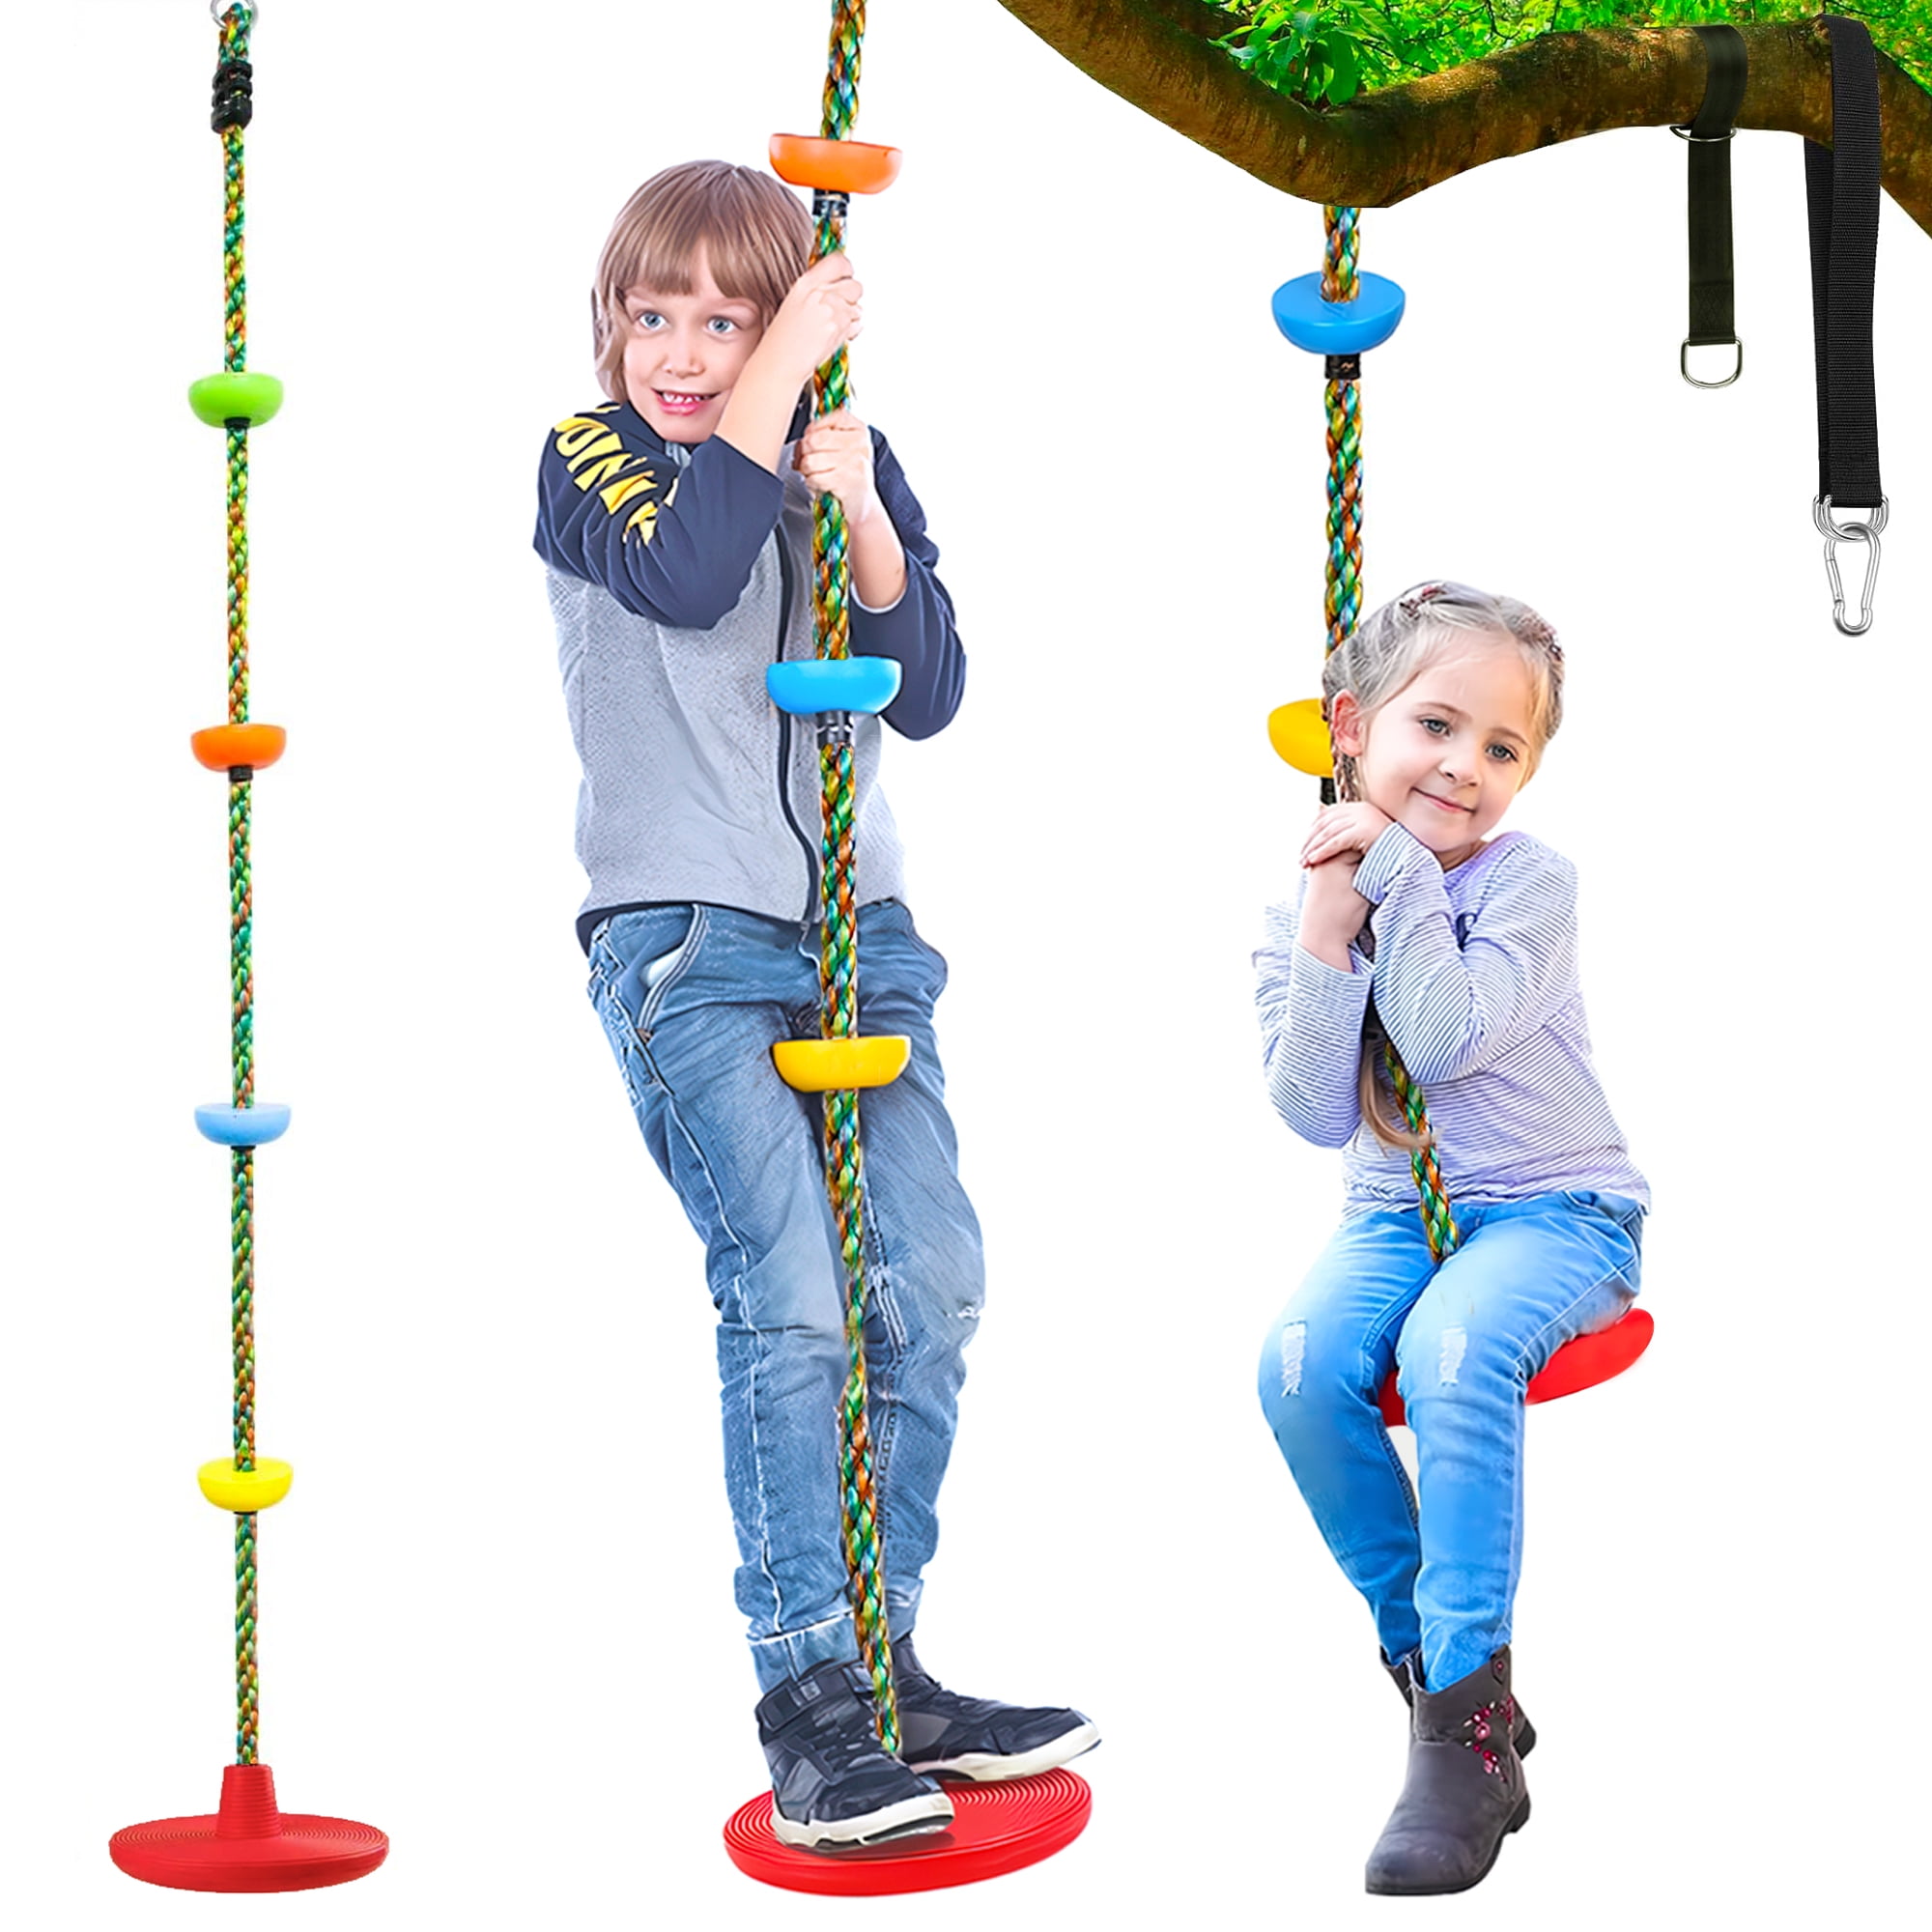 iFanze Tree Swing for Kids, 3-in-1 Climbing Rope with Platforms